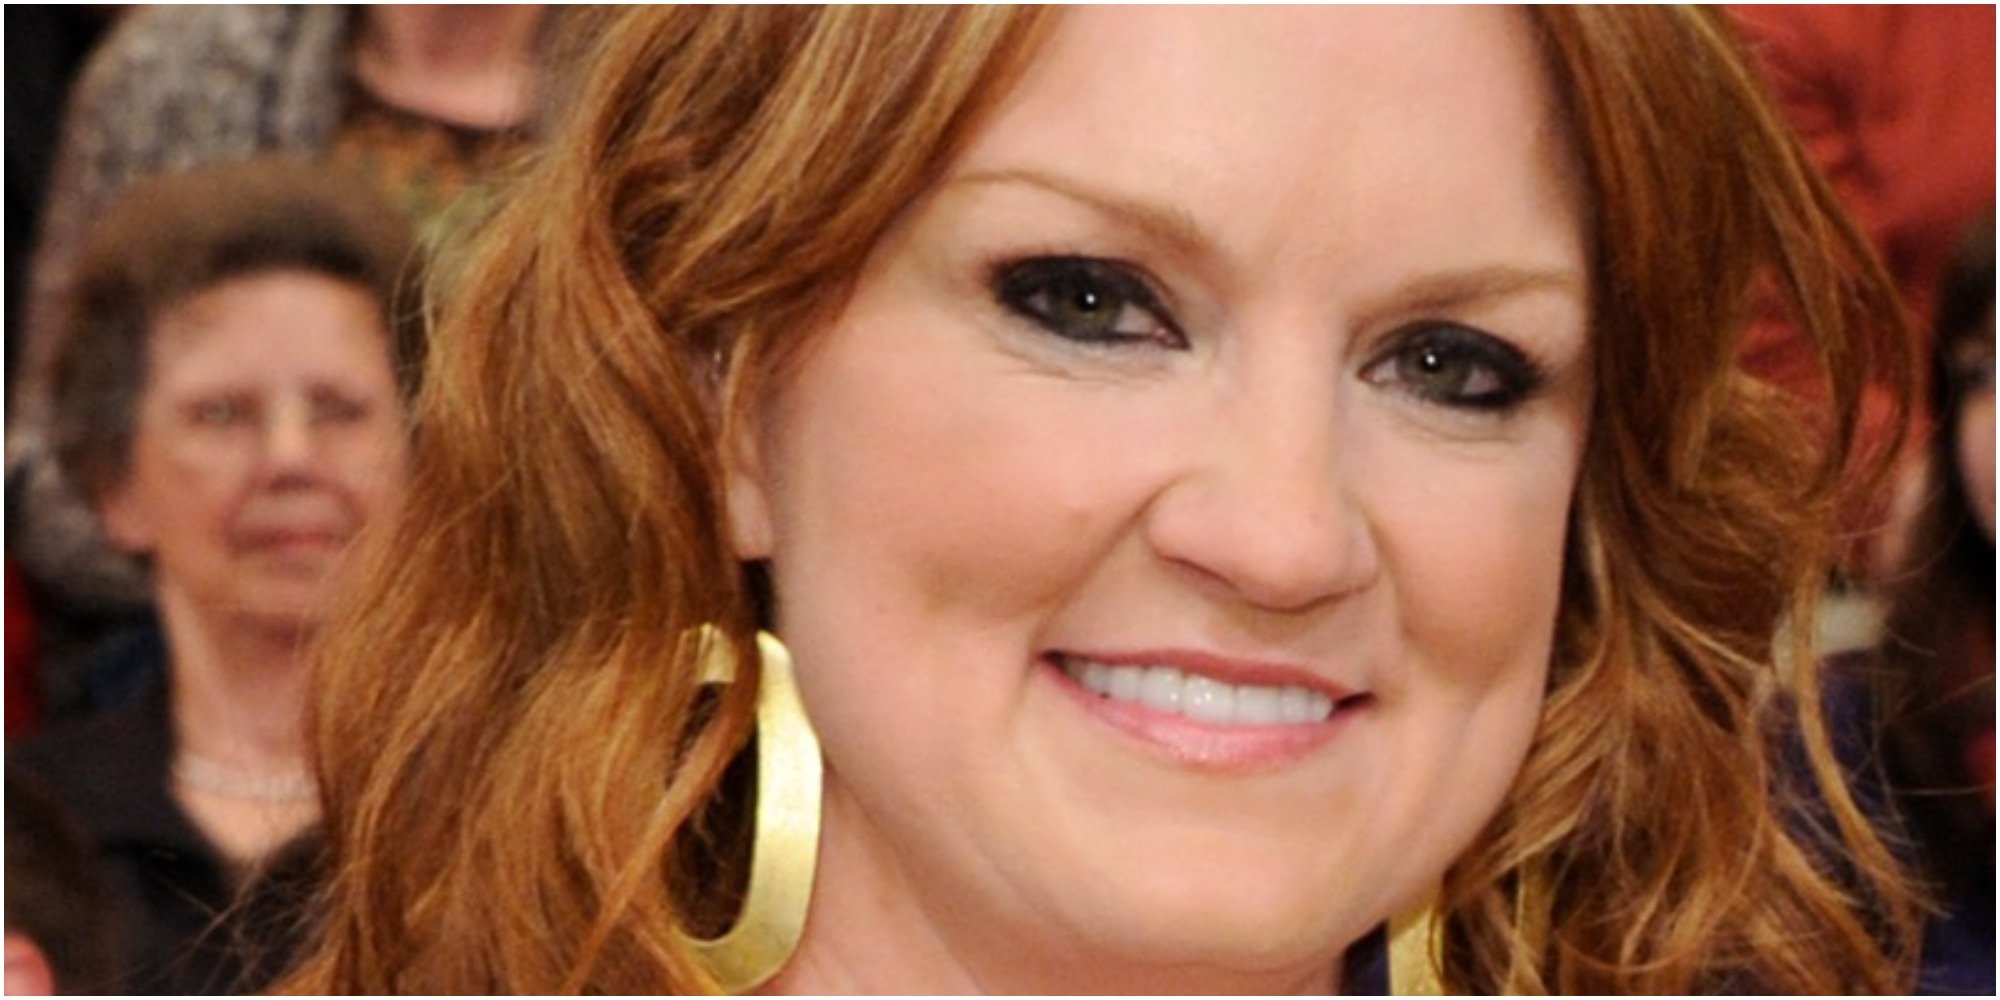 ‘The Pioneer Woman’: Ree Drummond Adds 1 Crunchy Surprise to Her Homemade Green Bean Casserole